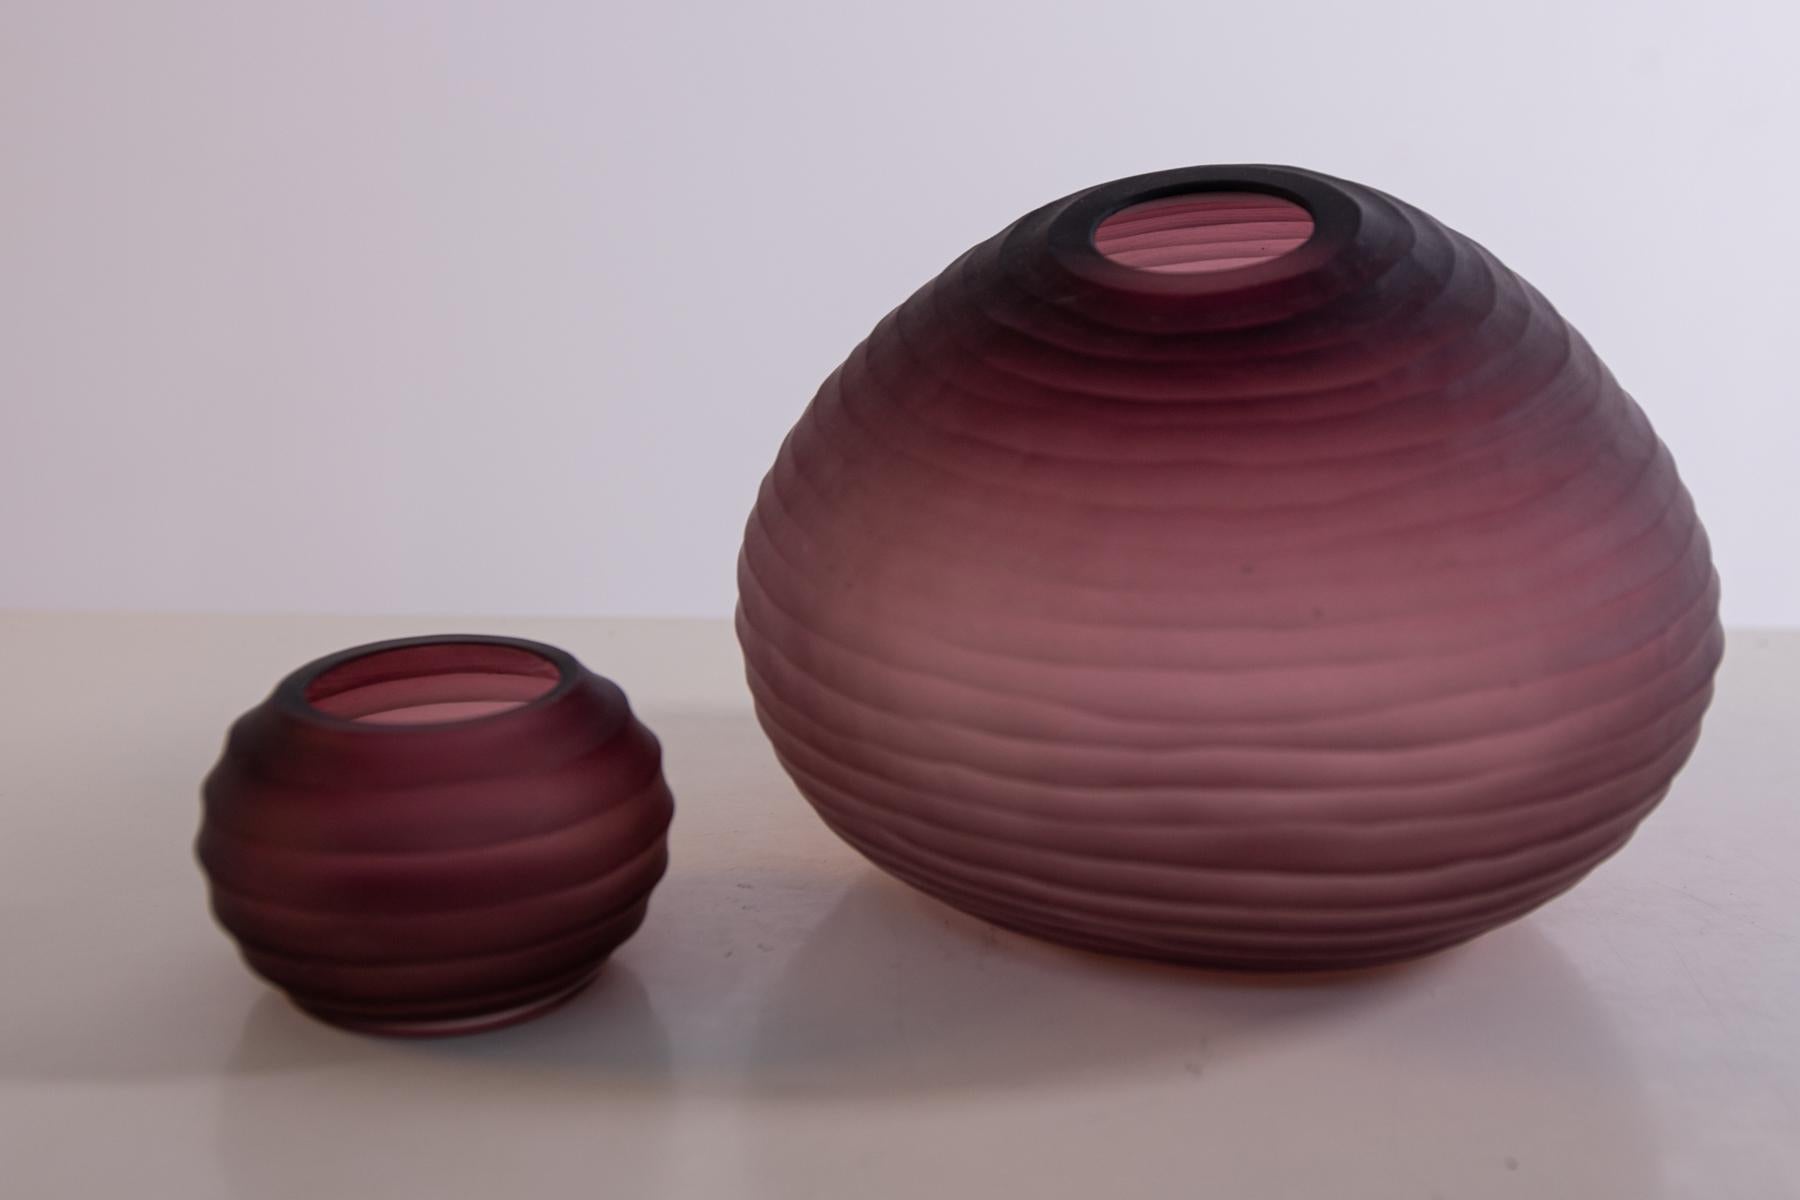 Pair of vases of Murano Bordeaux 1980s signed
Elegant pair of Murano vases from the 1980s. The vases are burgundy in satin glass with waves. The set is composed by a bigger and a smaller vase. Signed at the base. The dimensions of the smaller vase